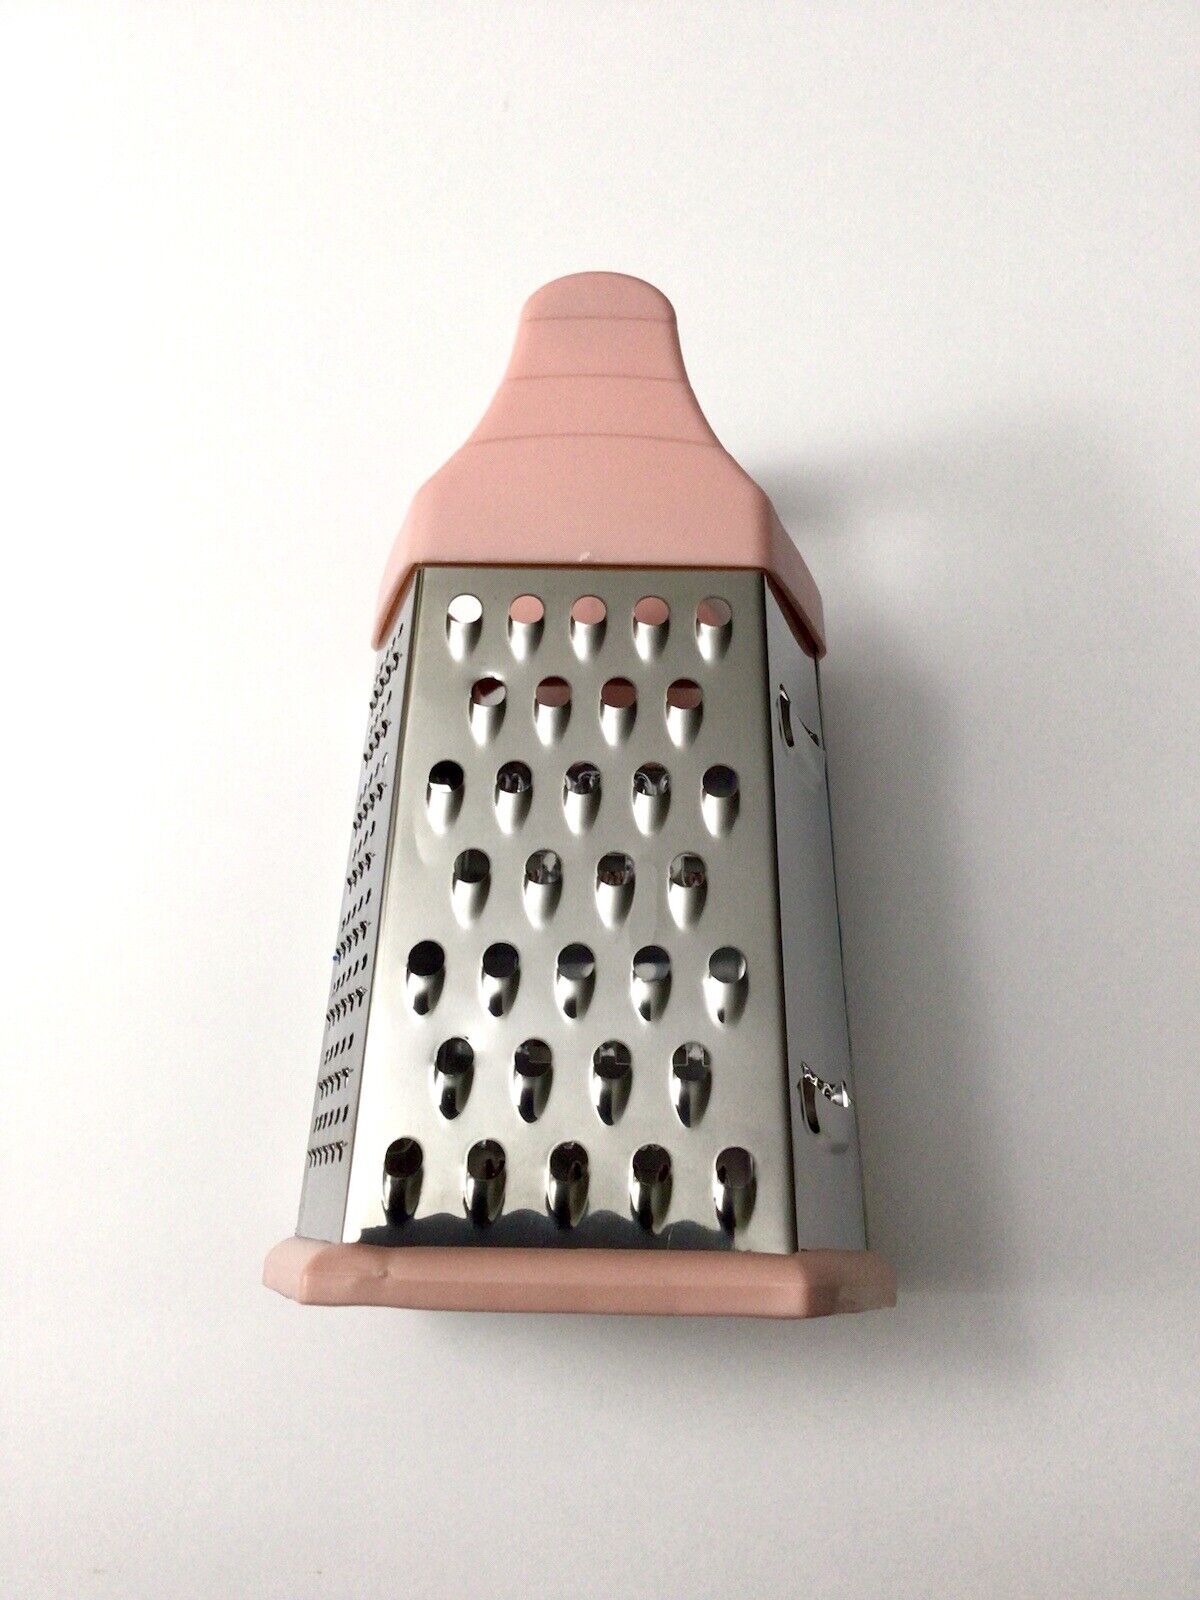 Heavy Duty Cheese Grater Cheese Grater and Stainless Steel Grater